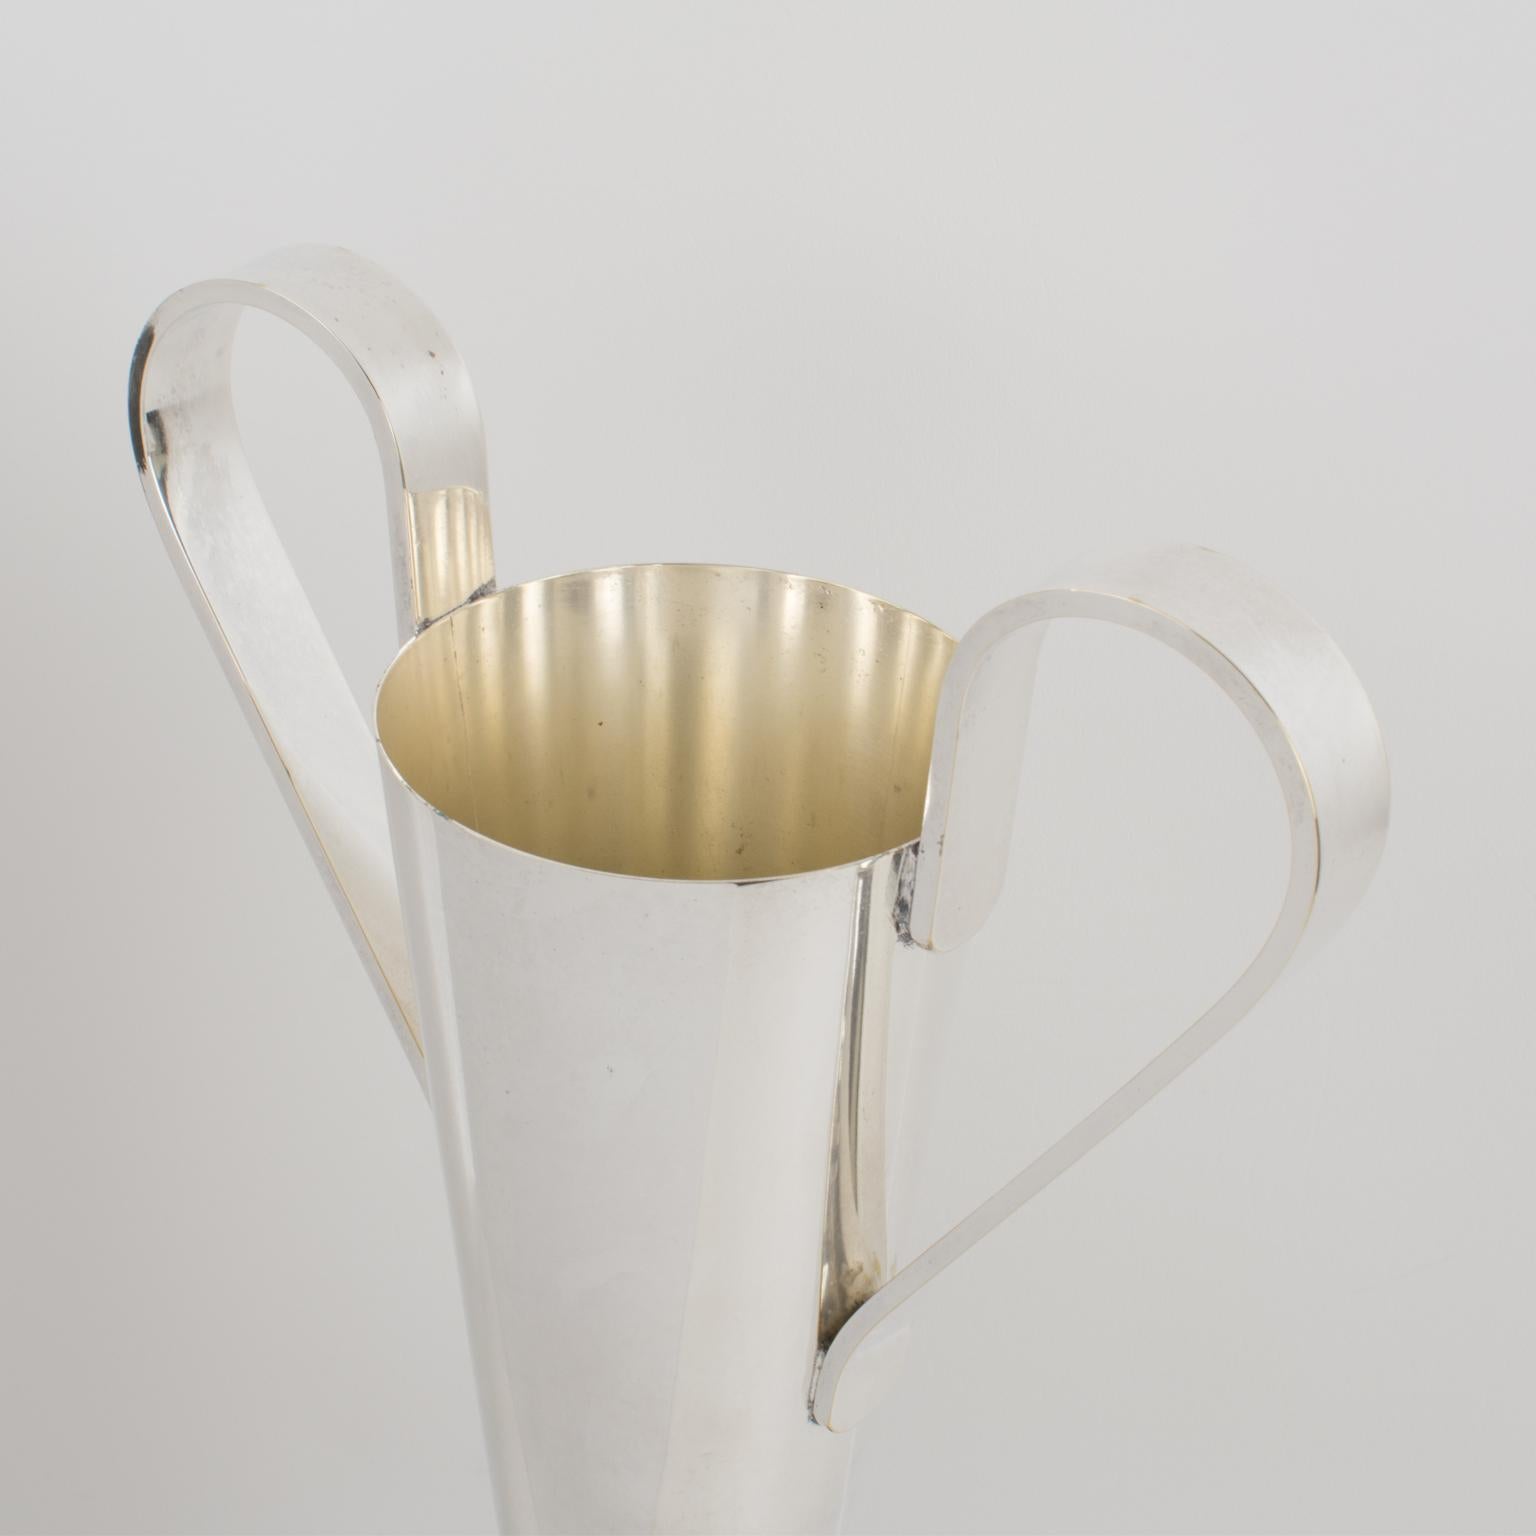 Art Deco Tall Silver Plate Vase with Handles on Marble Base, France 1930s For Sale 1